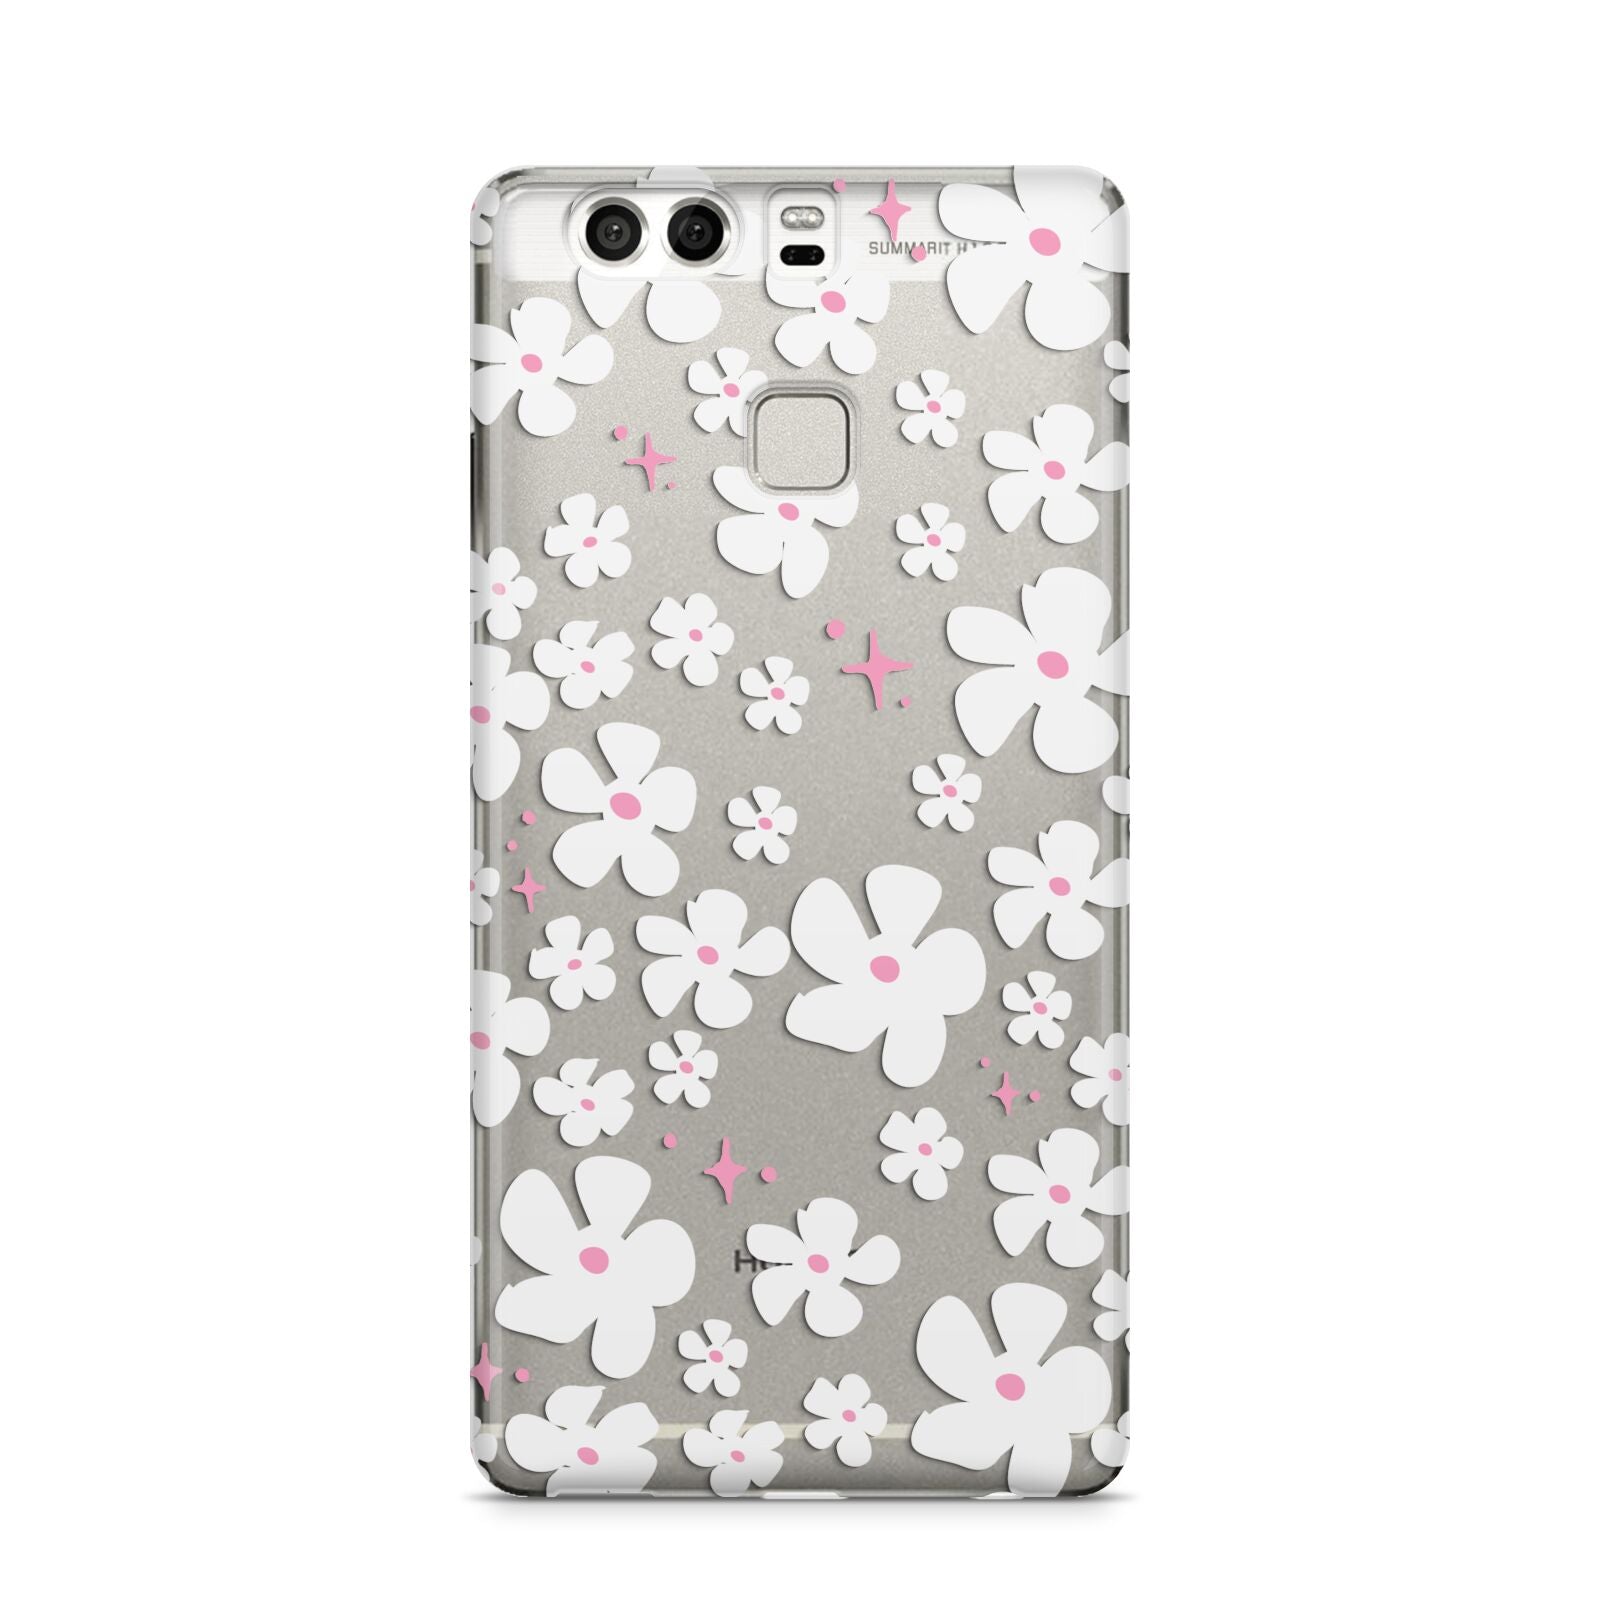 Abstract Daisy Huawei P9 Case